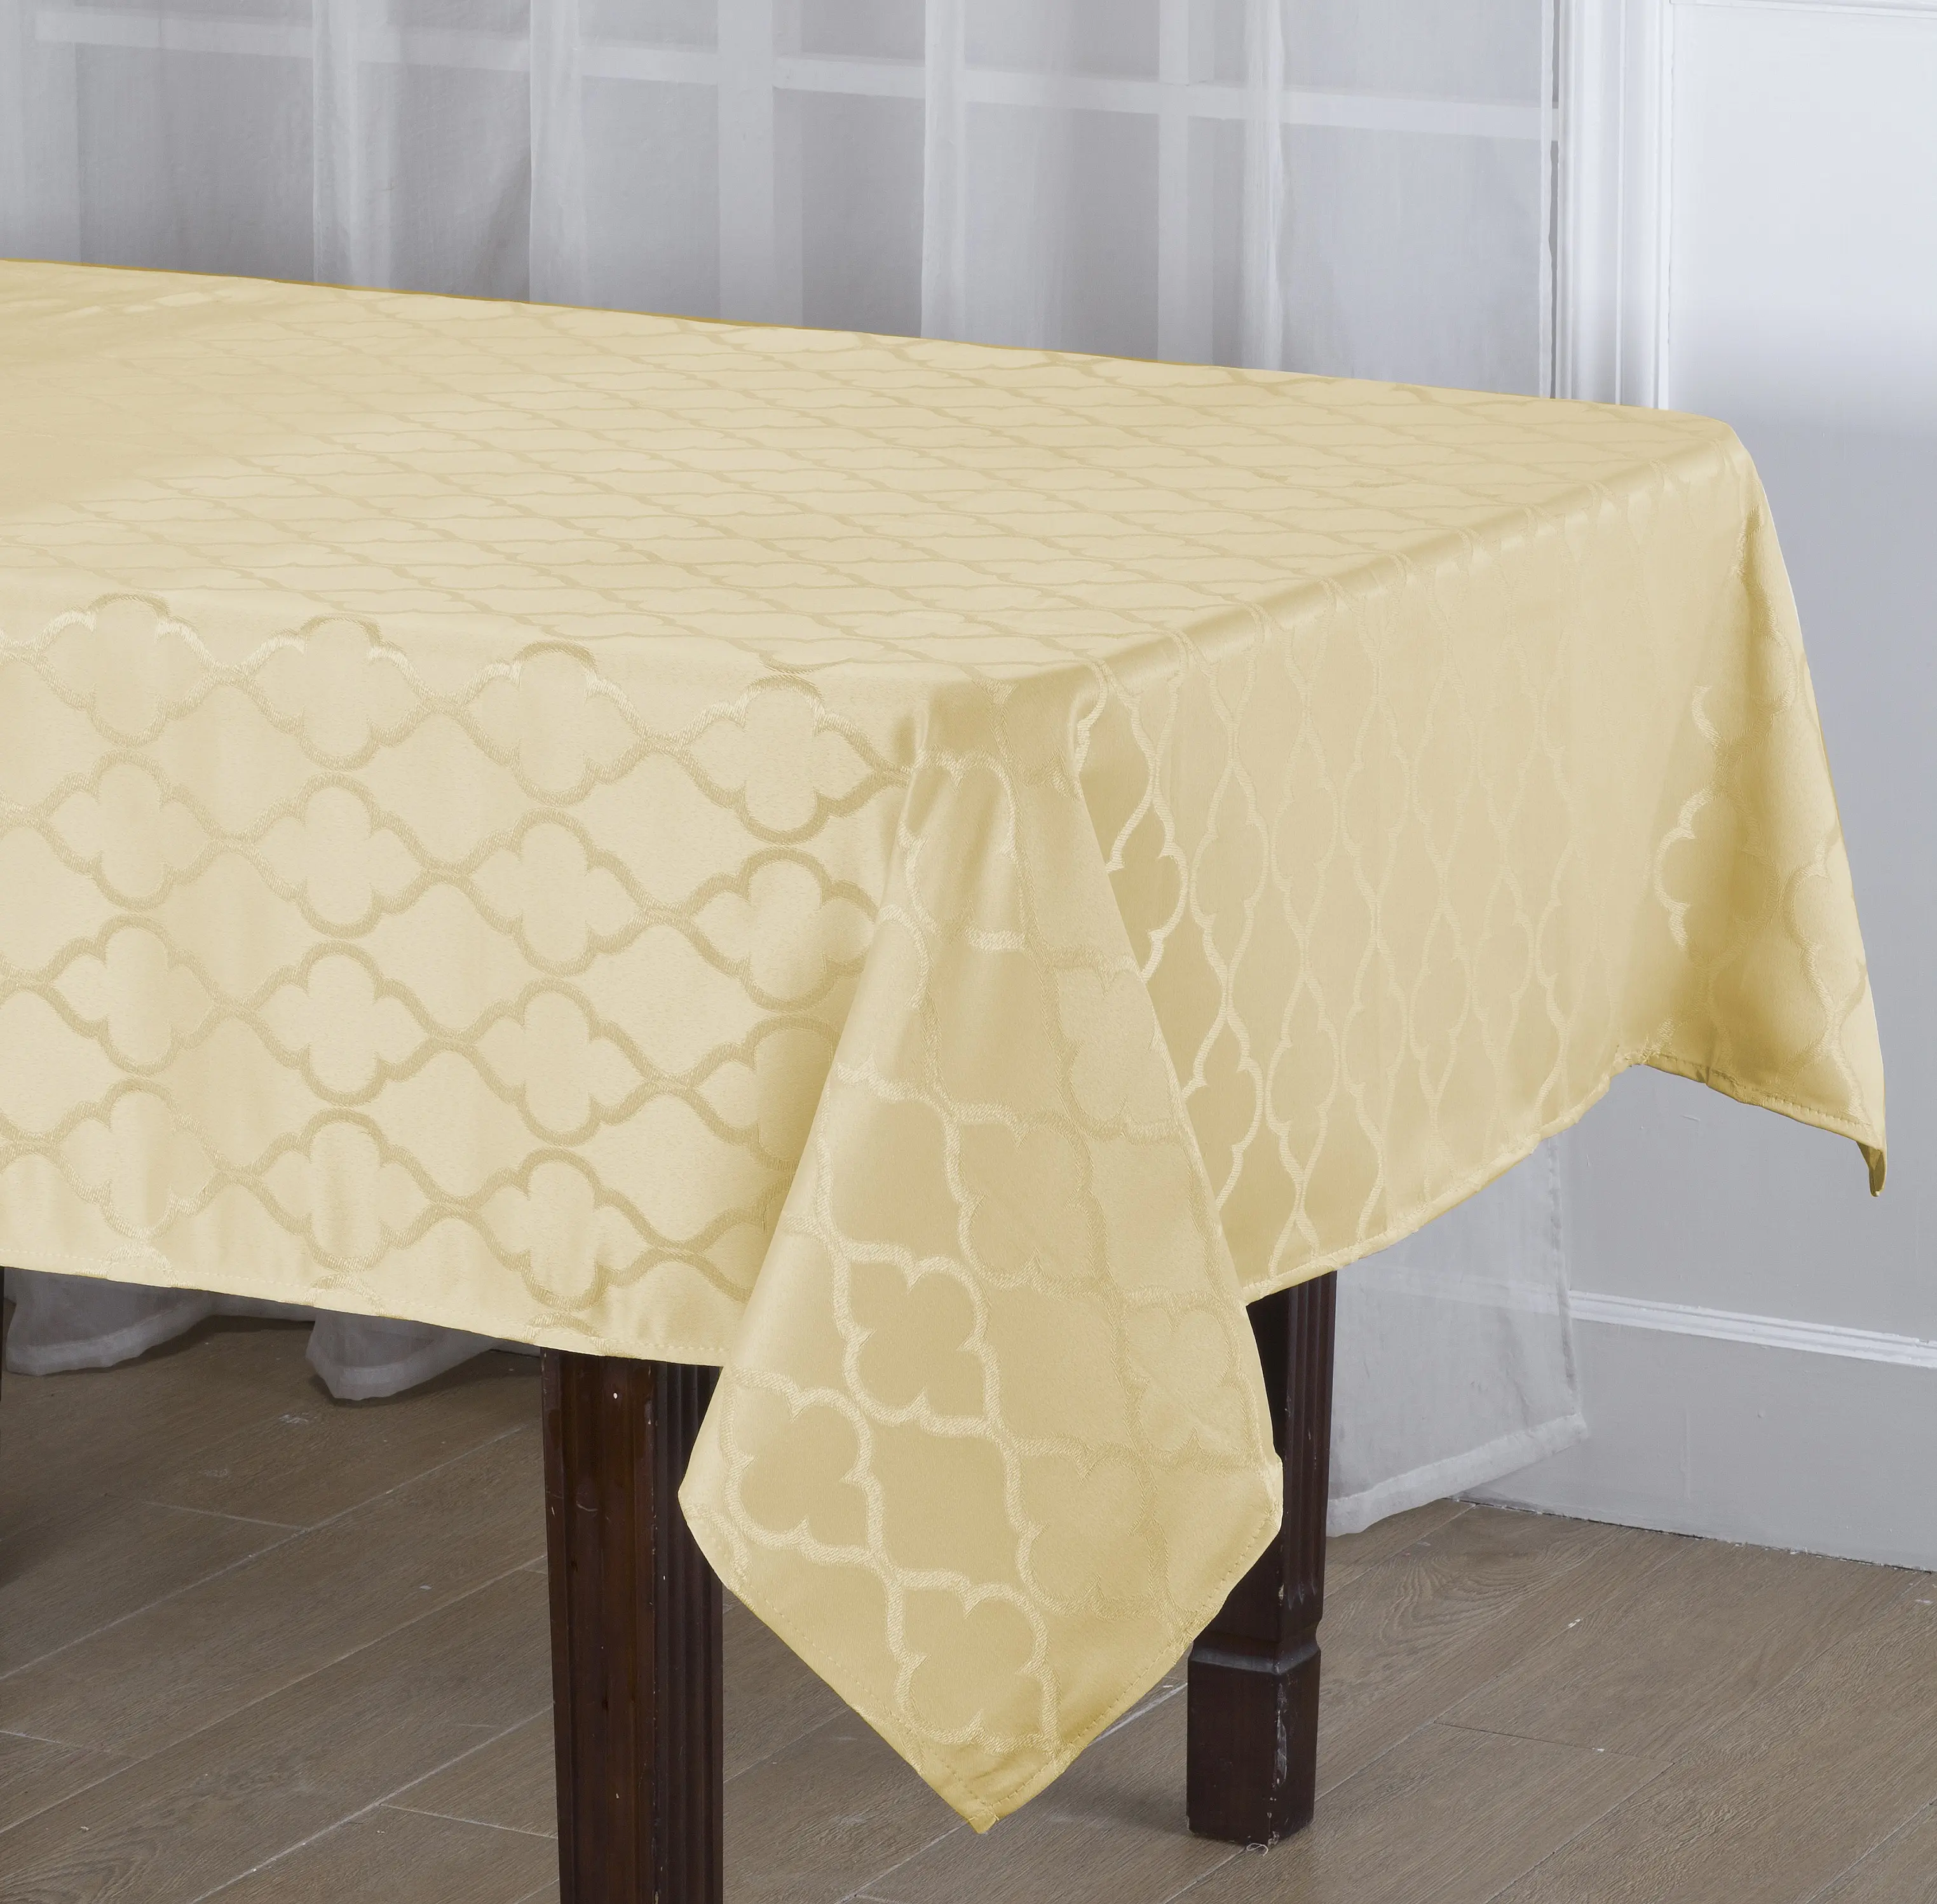 Jacquard Tablecloth Flower Pattern Polyester Table Cloth Spill Proof Dust-Proof Table Cover for Kitchen Dining 54x90" Gold